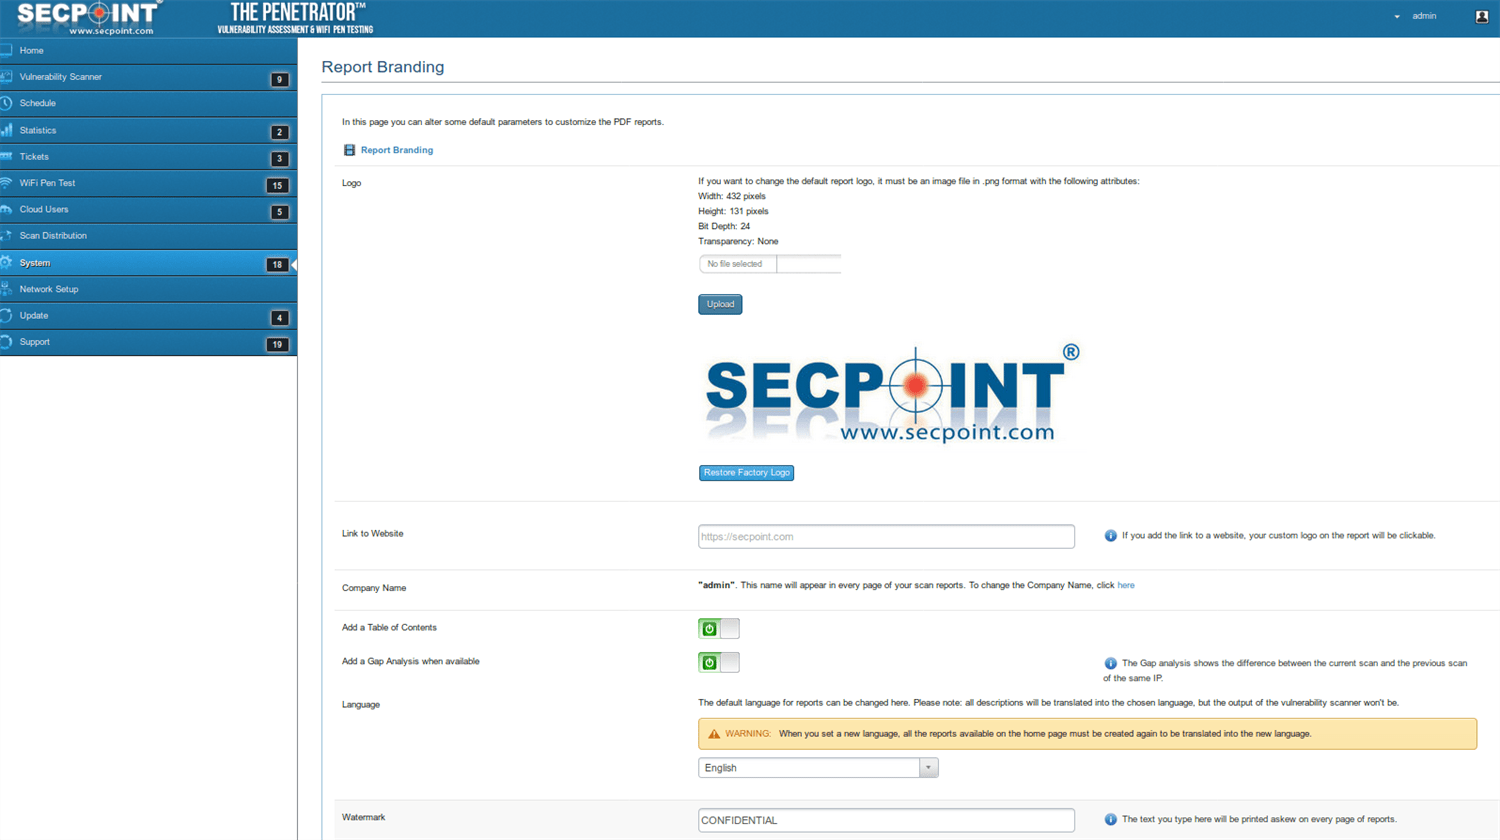 SecPoint Penetrator S9 - 256 IP Concurrent Scan License Security Scan (3 Years License) - SecPoint